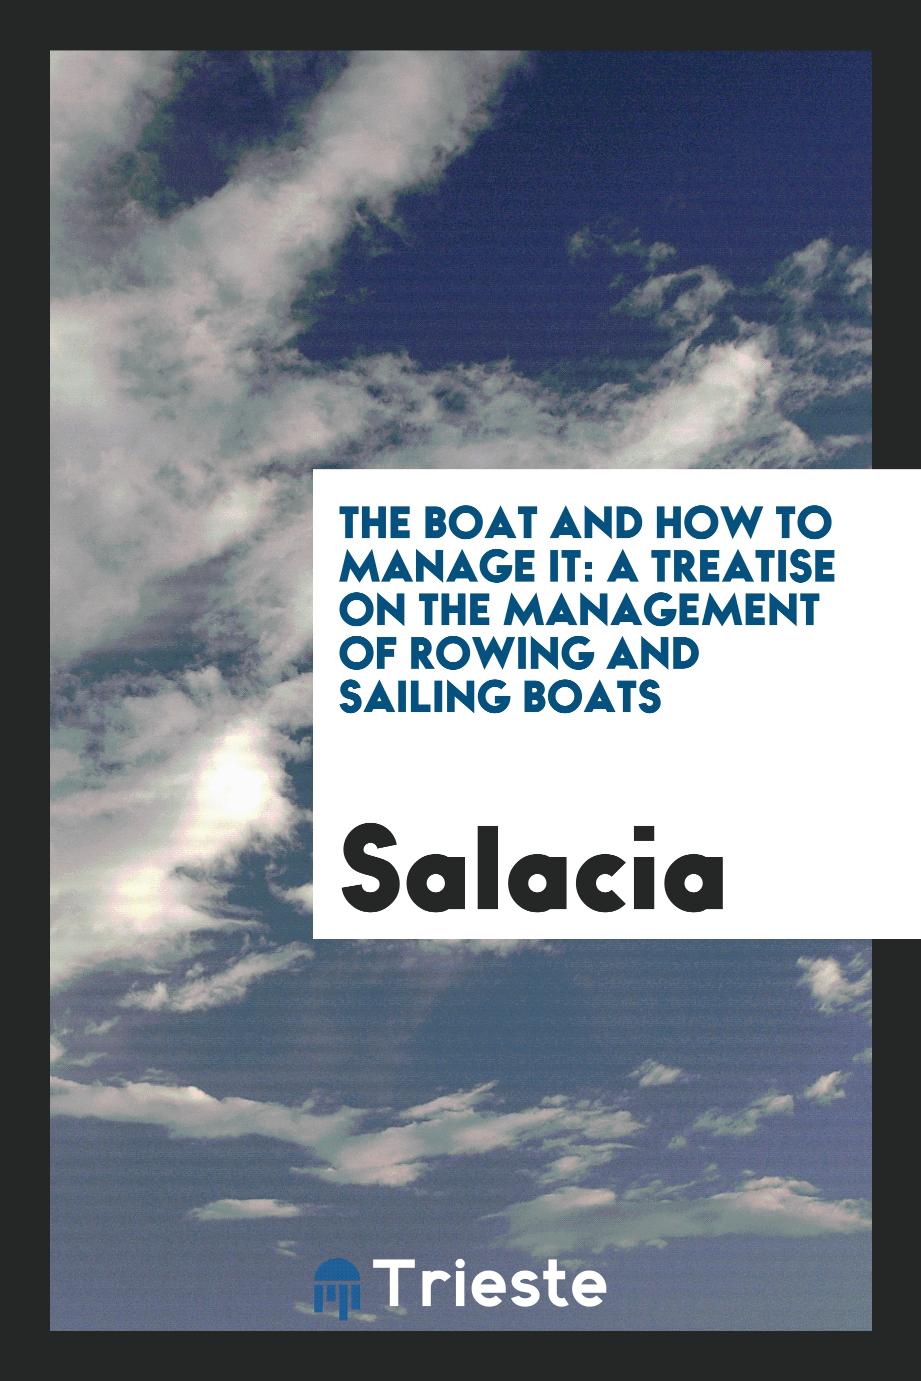 The Boat and How to Manage It: A Treatise on the Management of Rowing and Sailing Boats